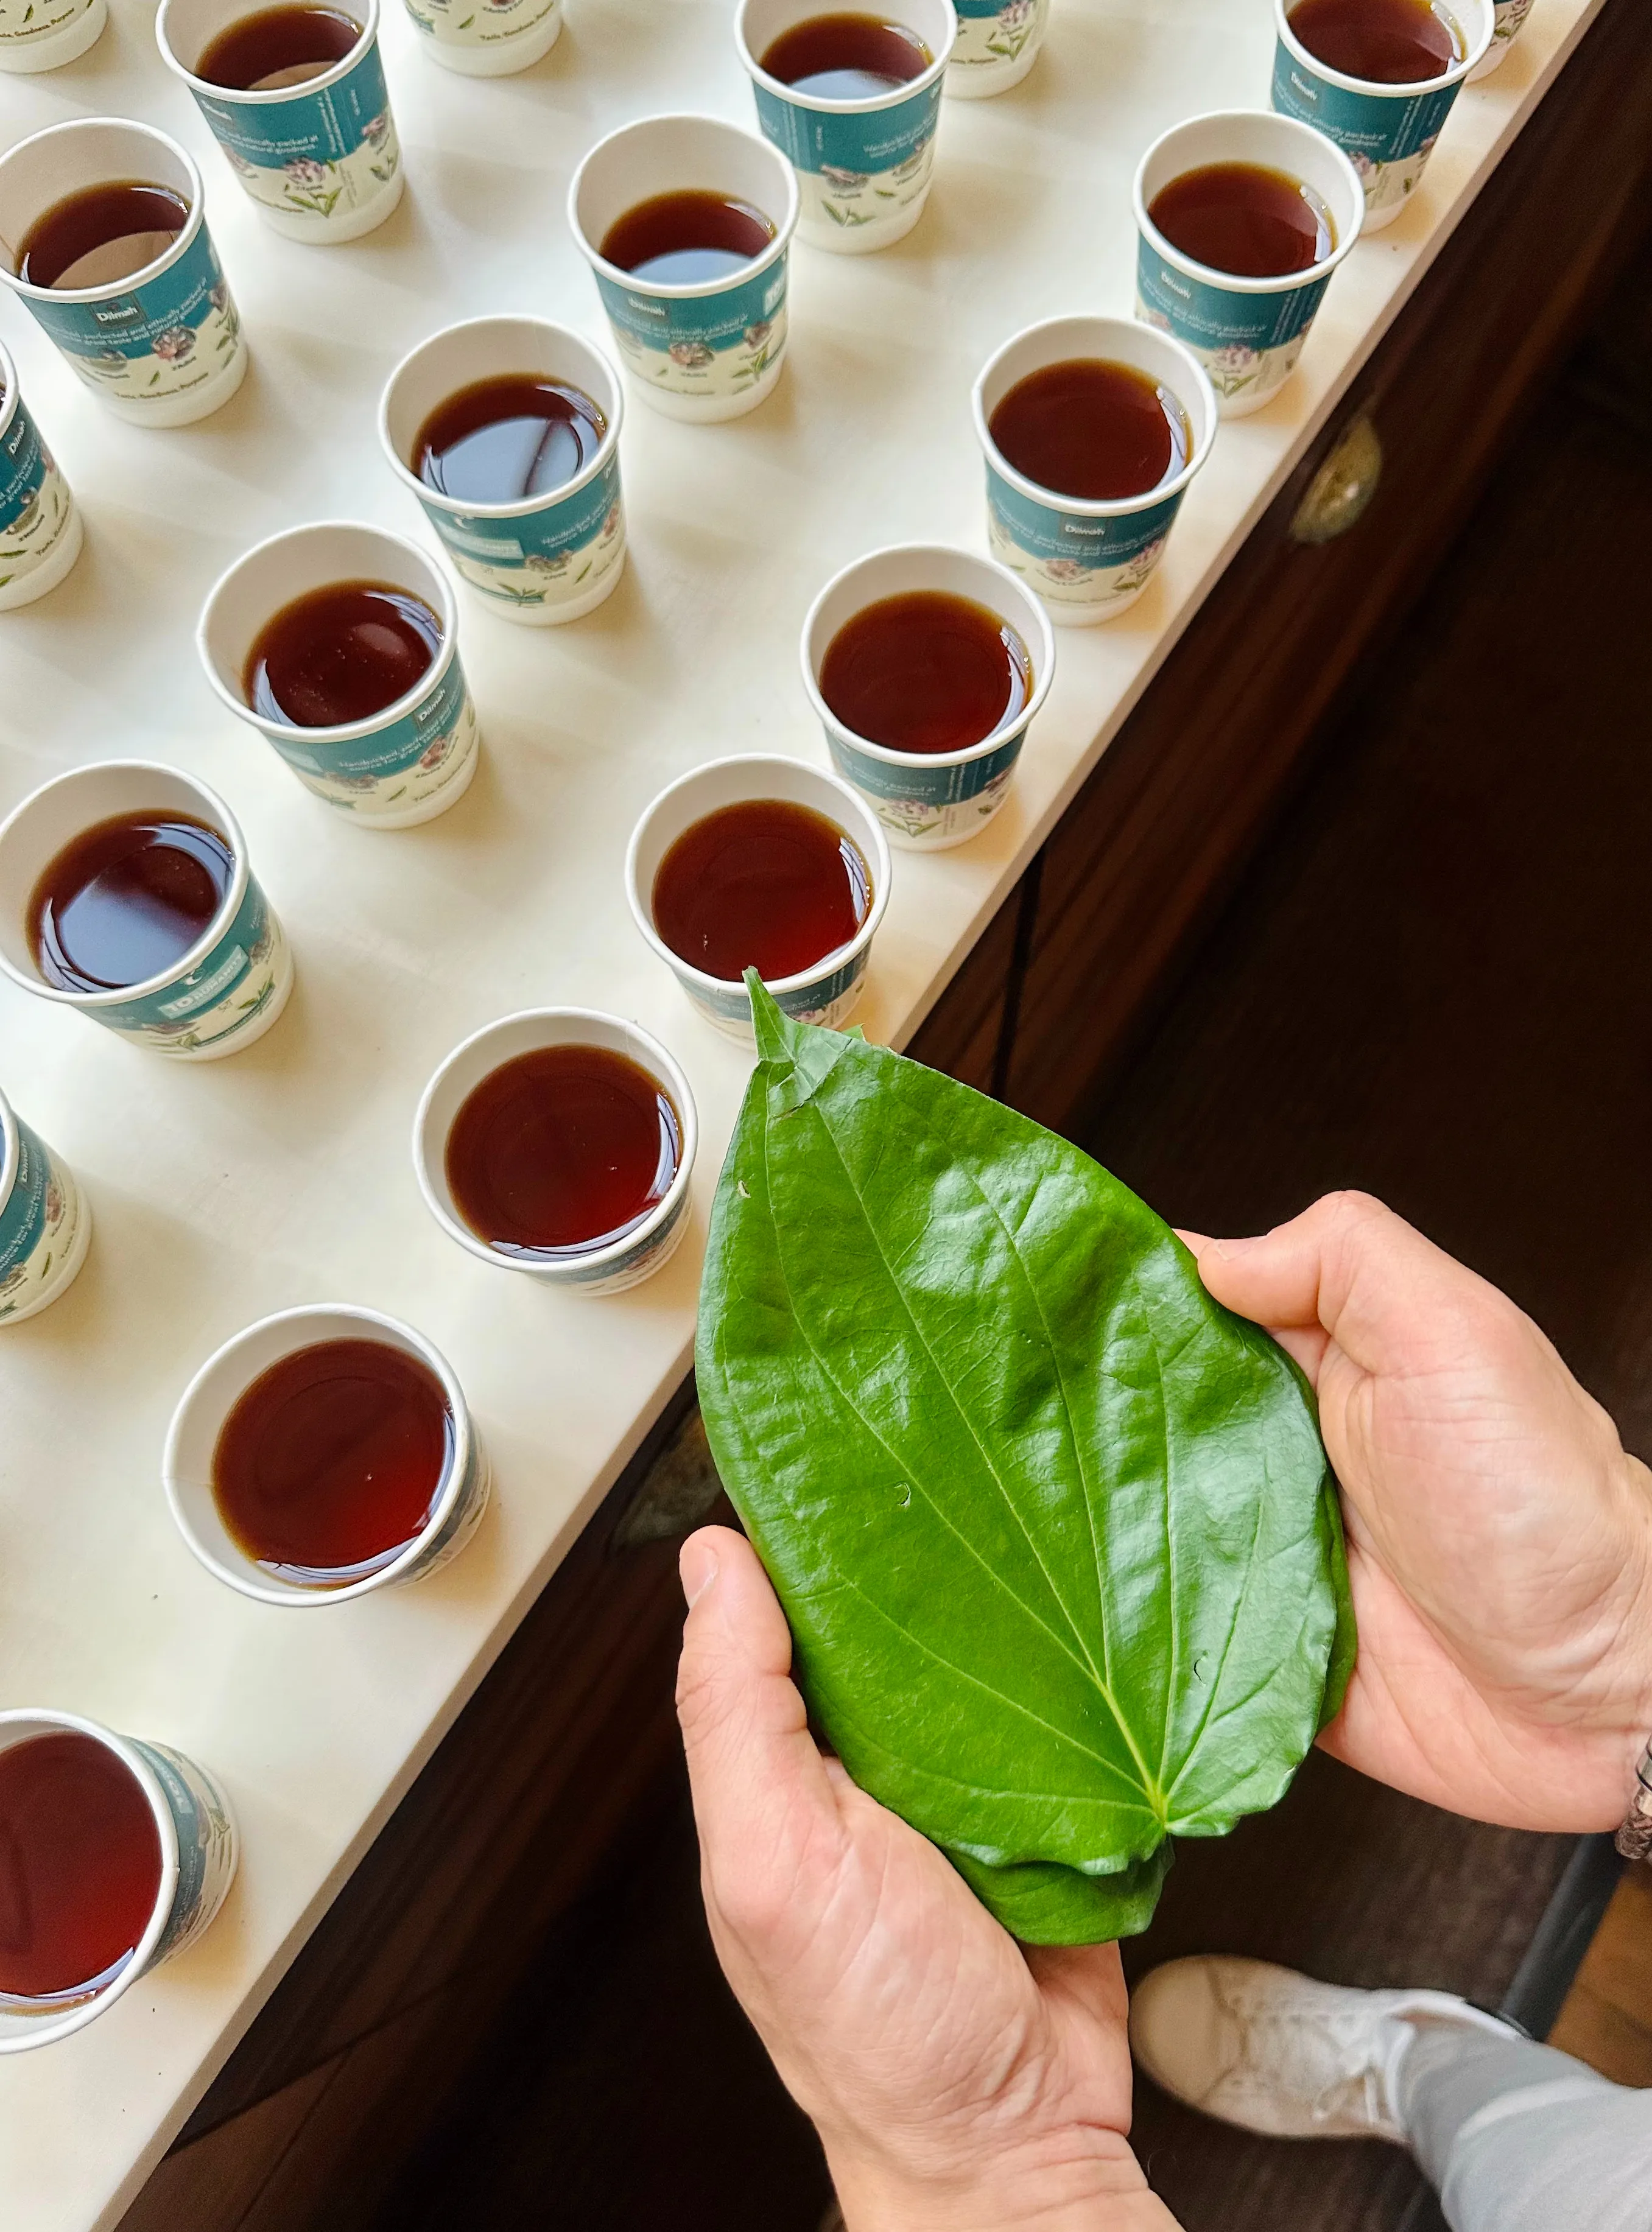 Tea cups neatly arranged, with hands holding a fresh leaf